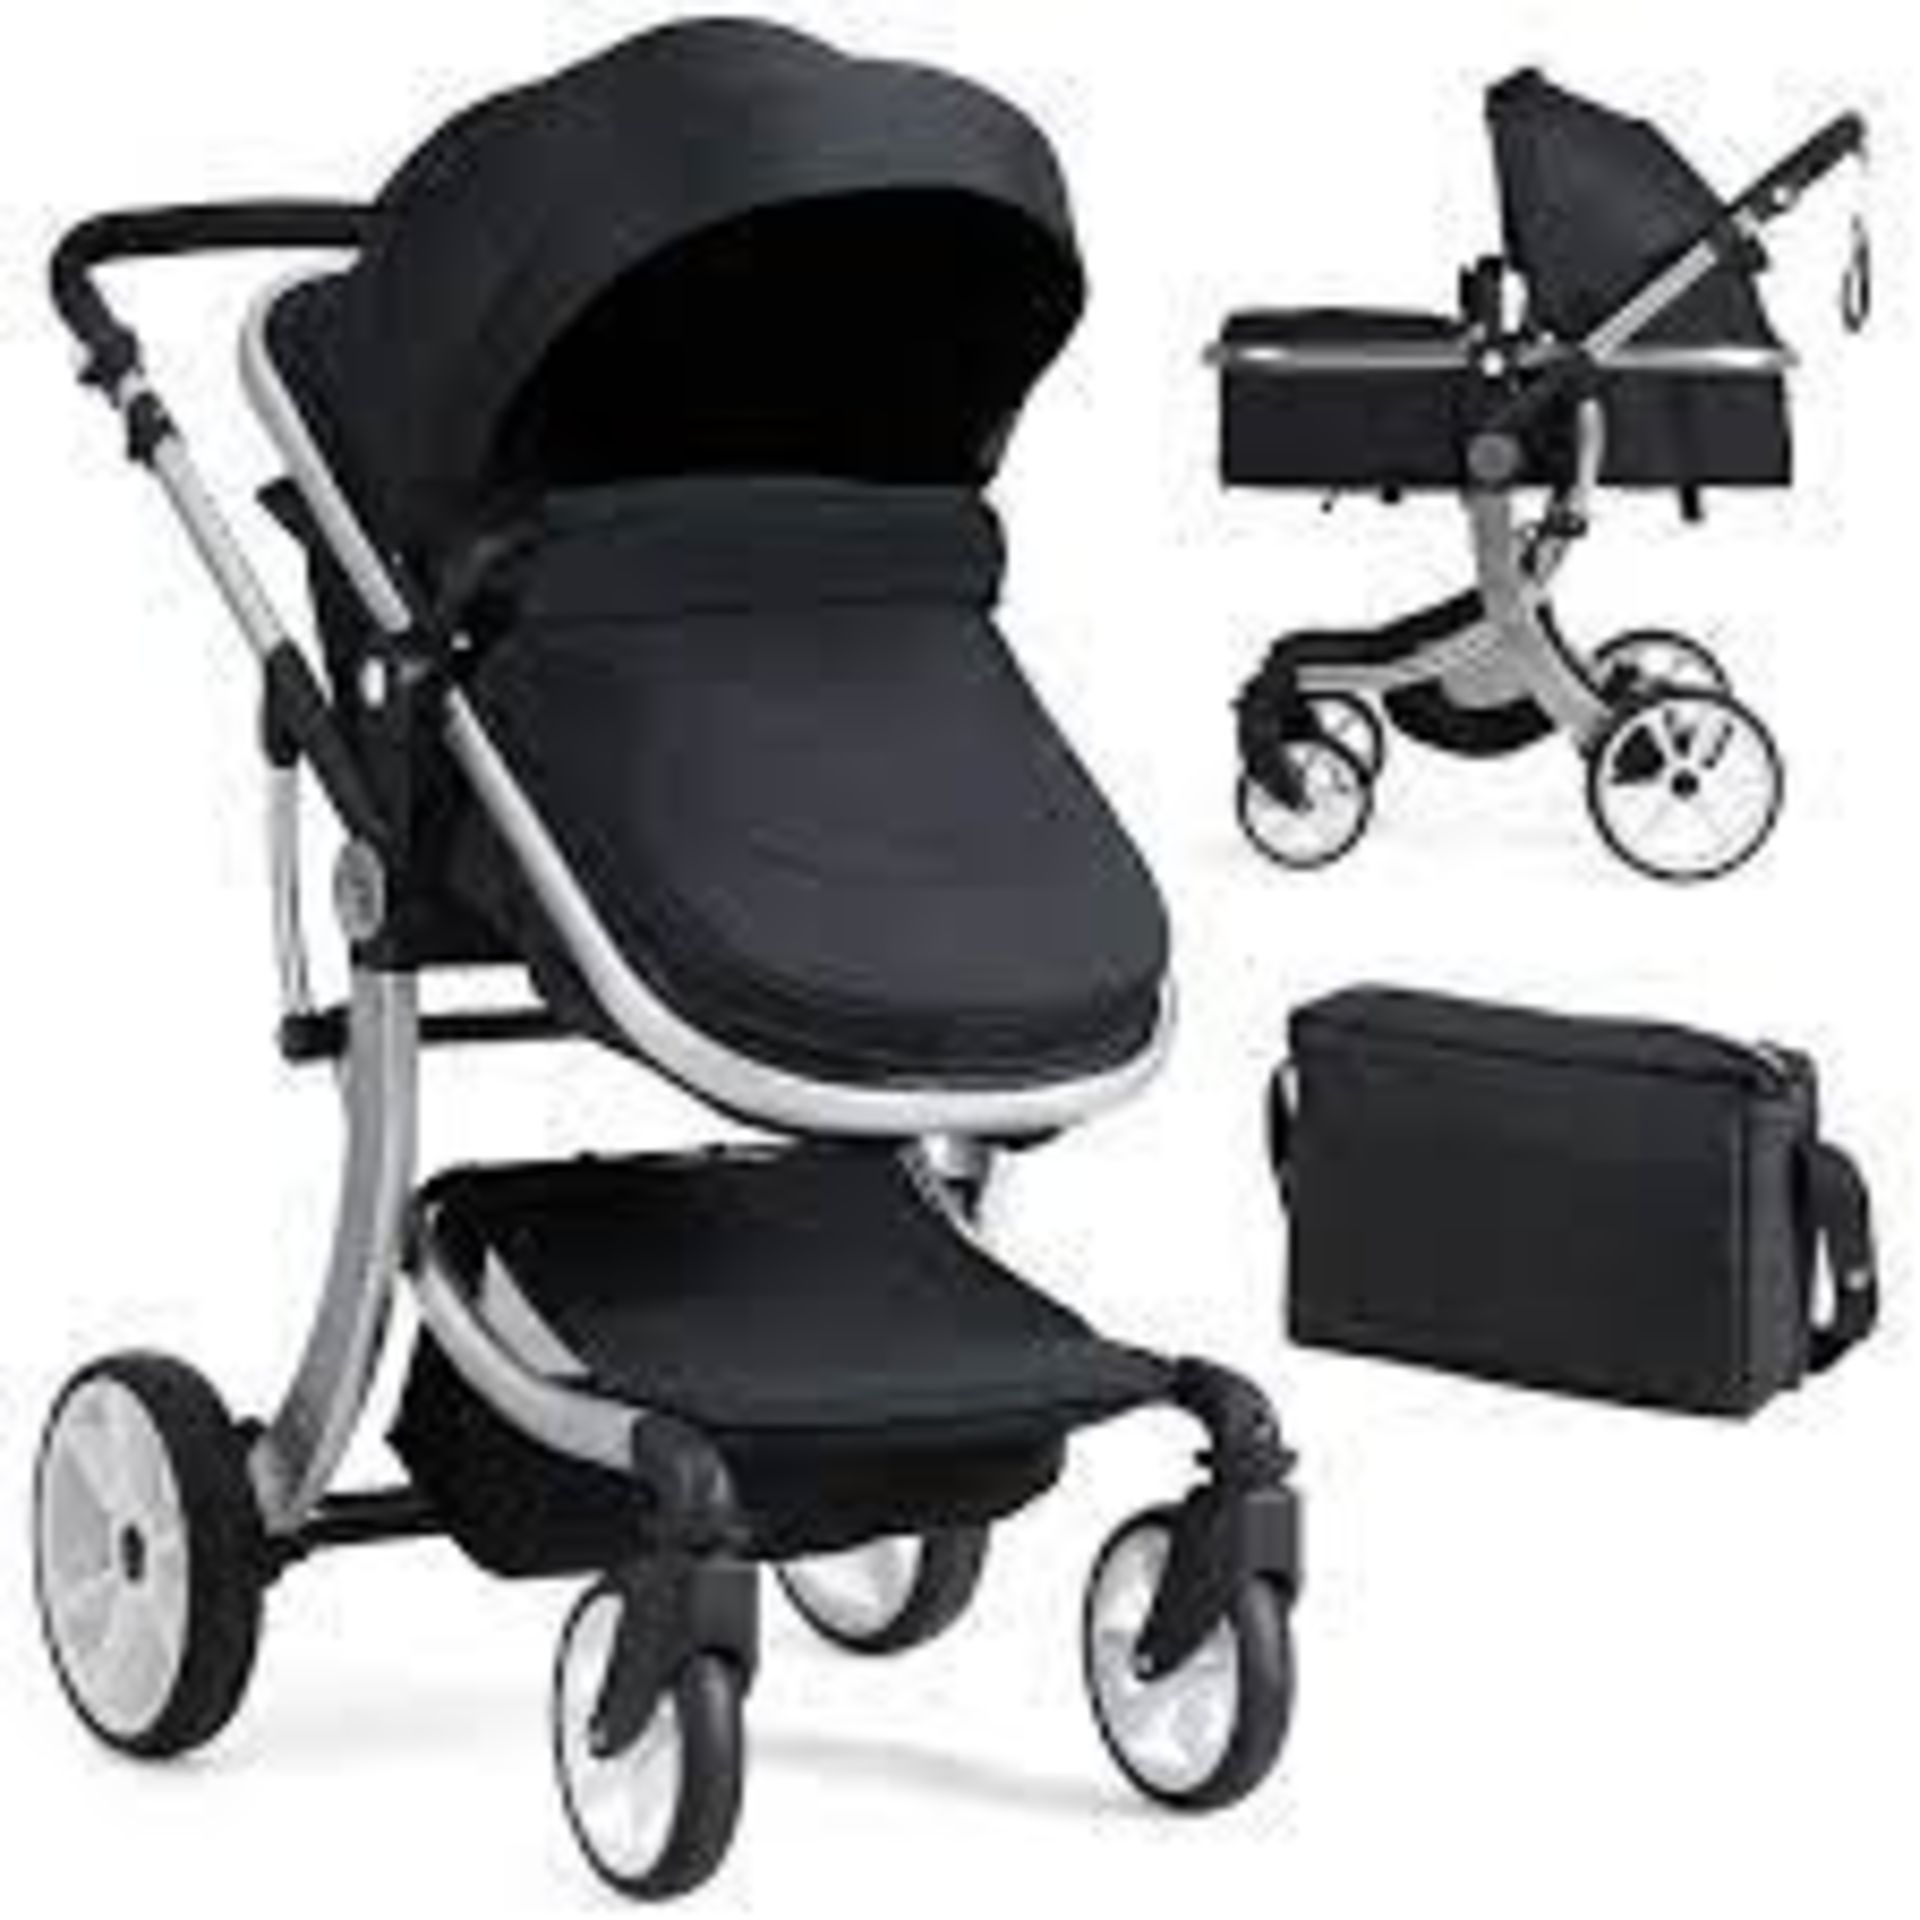 2 in 1 Foldable Baby Stroller with Rain Cover and Mosquito Net-Grey - ER54